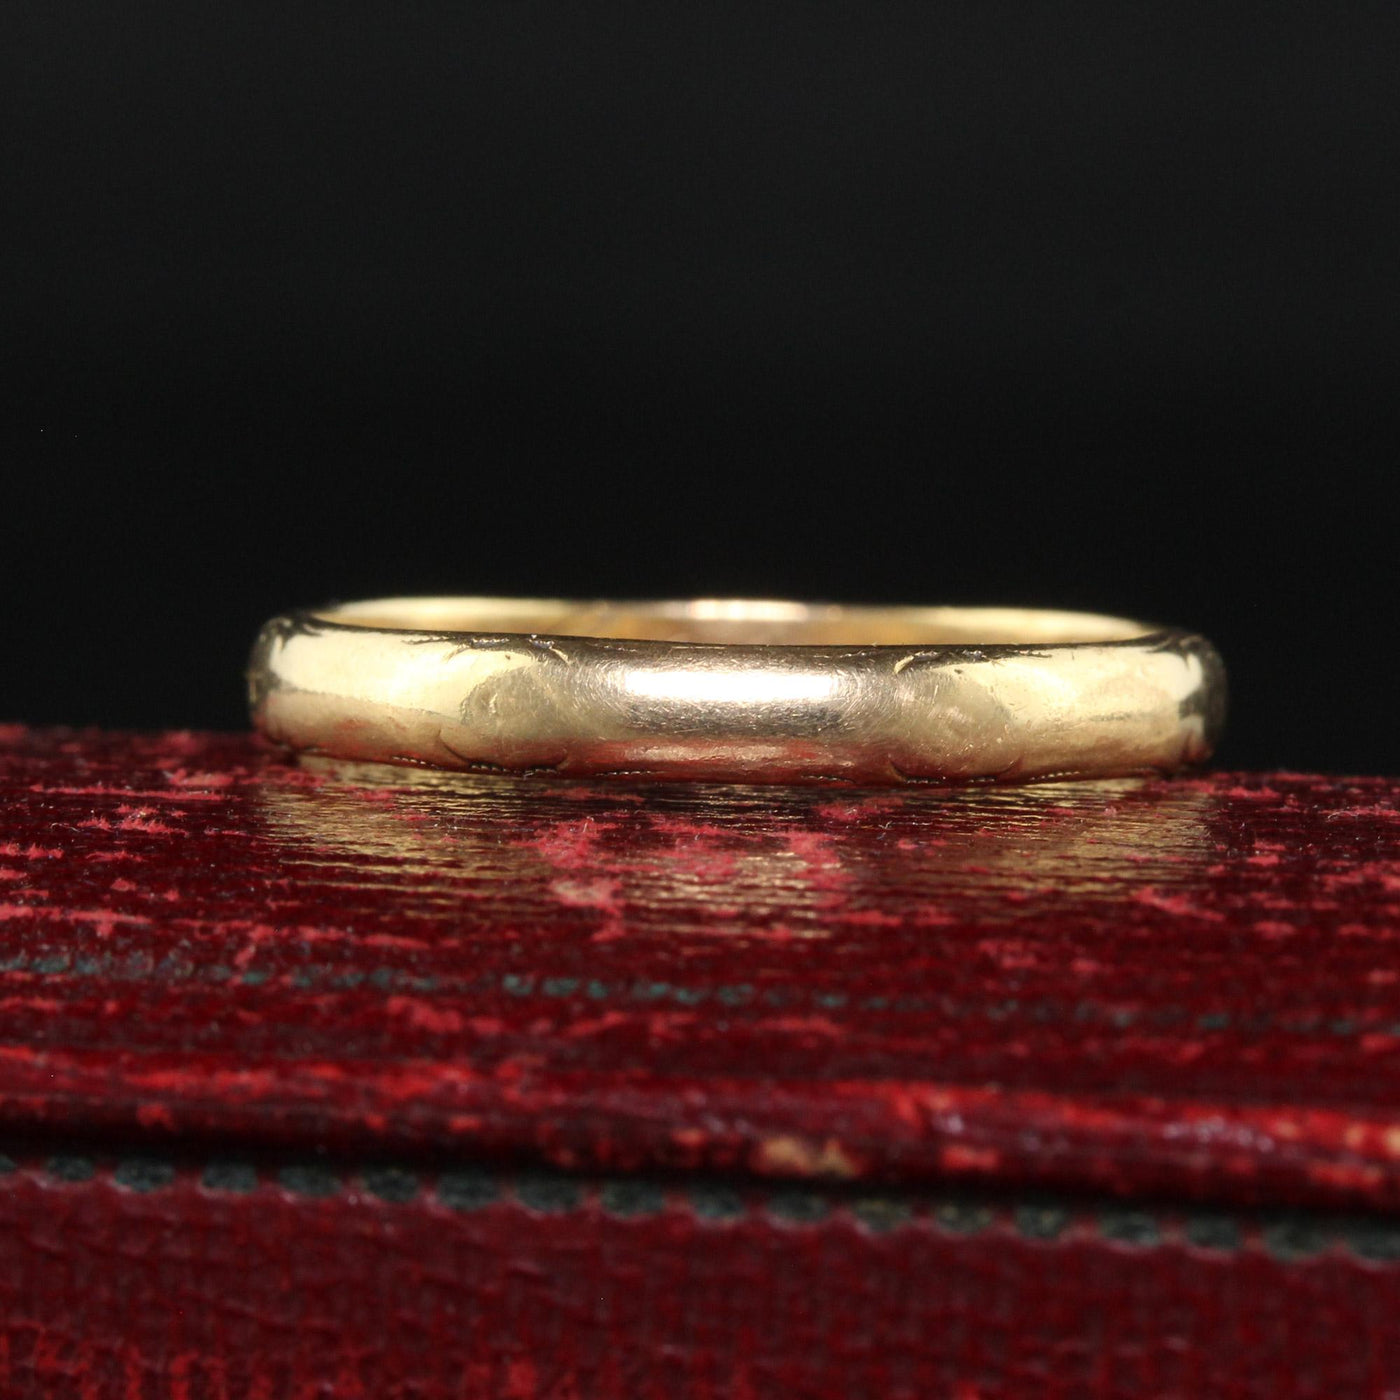 Antique Art Deco 14K Yellow Gold Engraved Wedding Band - Size 10